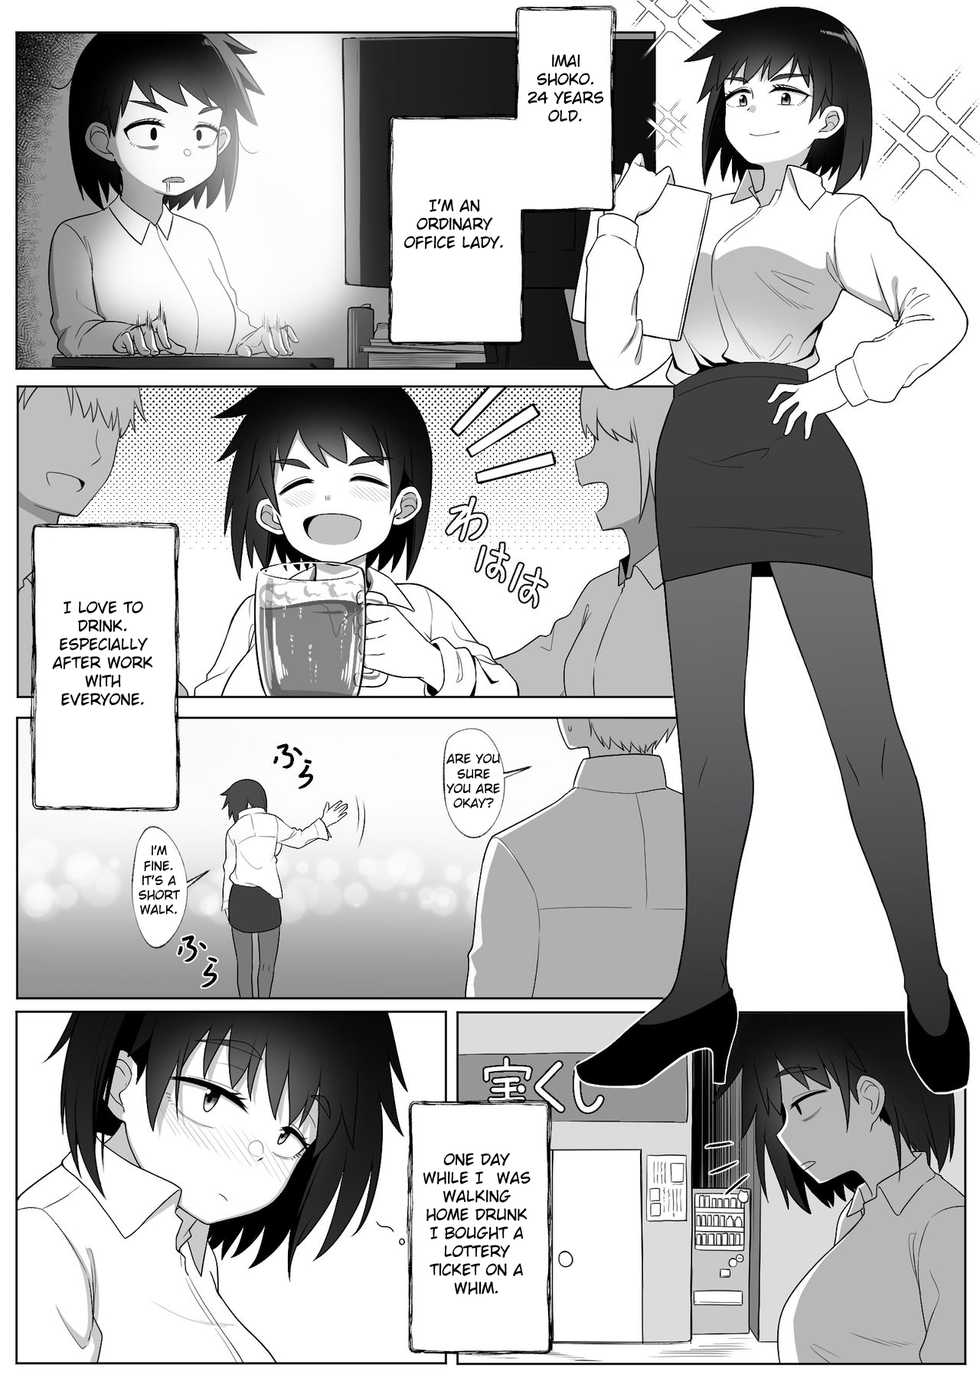 [Xion] Mirror Collection 2 [English] - Page 3